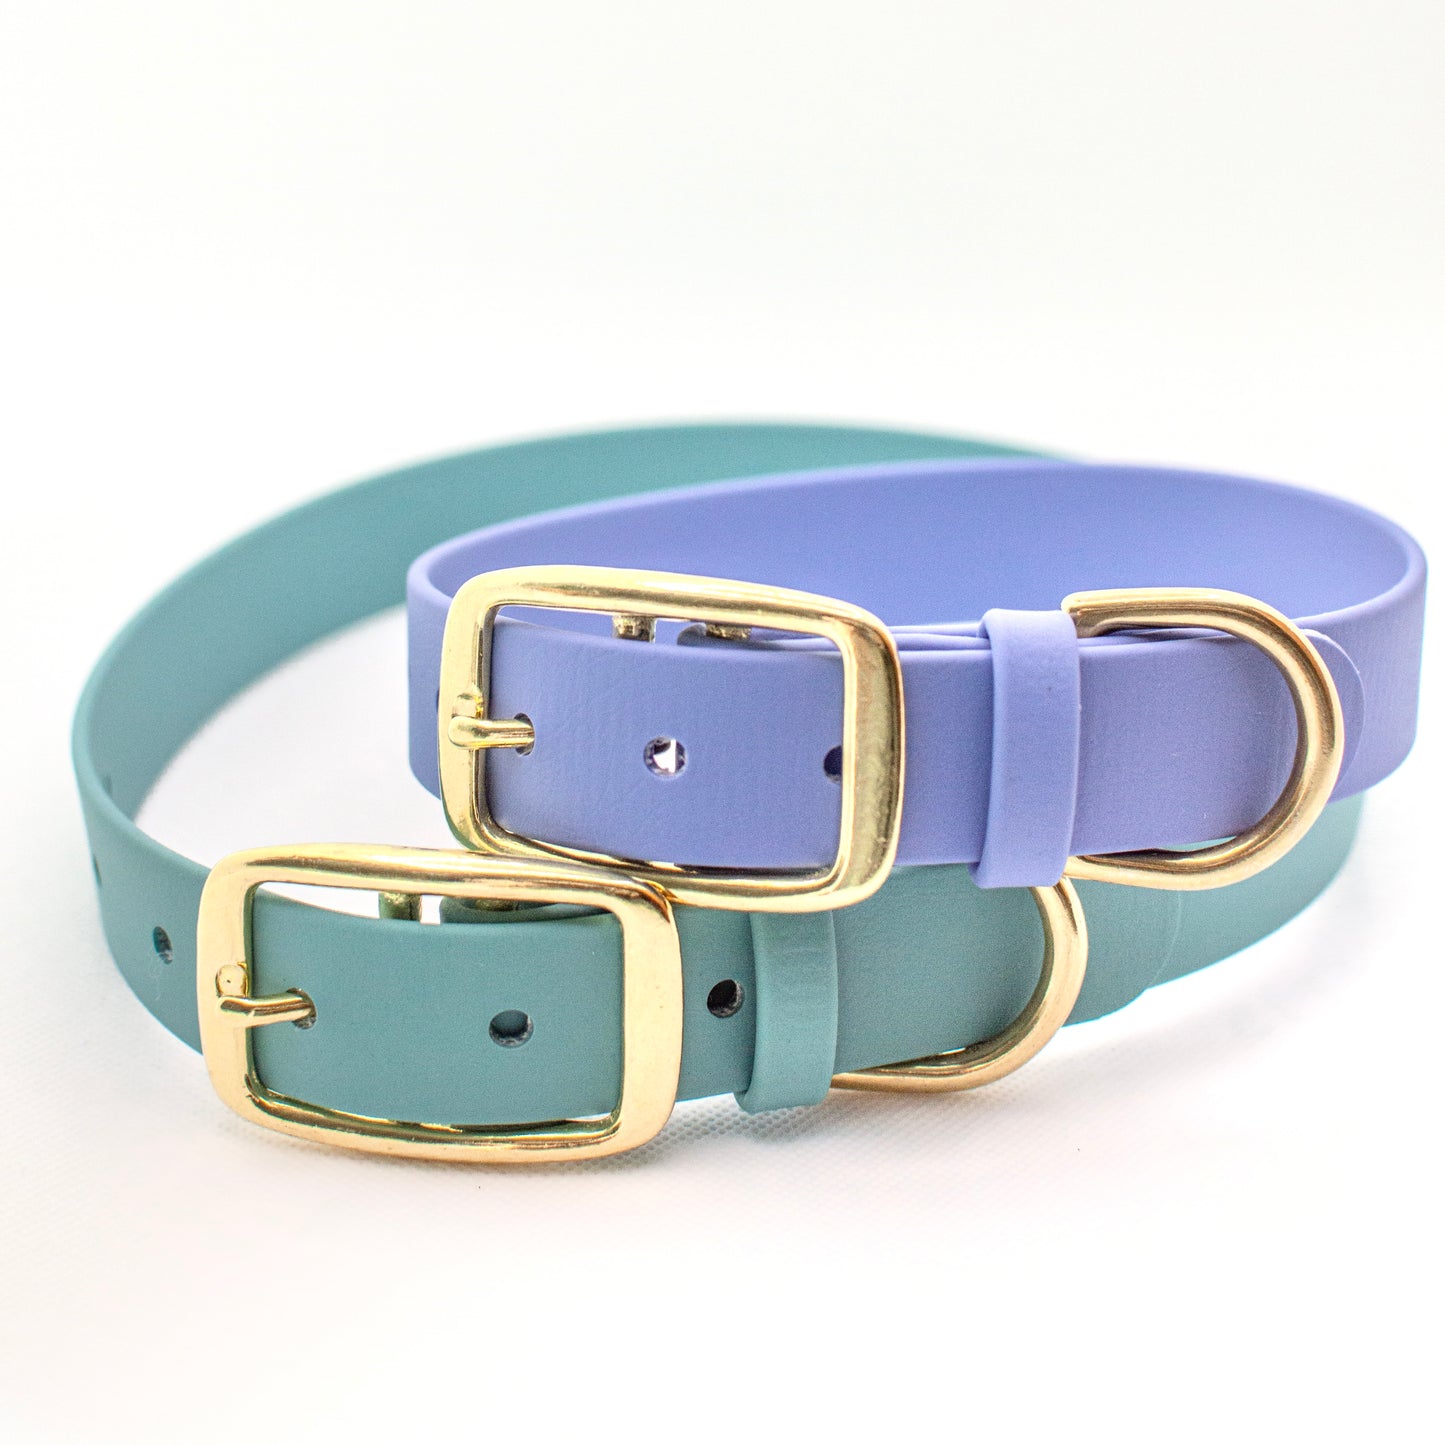 Biothane Dog Collar Handmade in Canada. Shipping to USA. Waterproof, odourproof, strong and easy to clean dog leash.